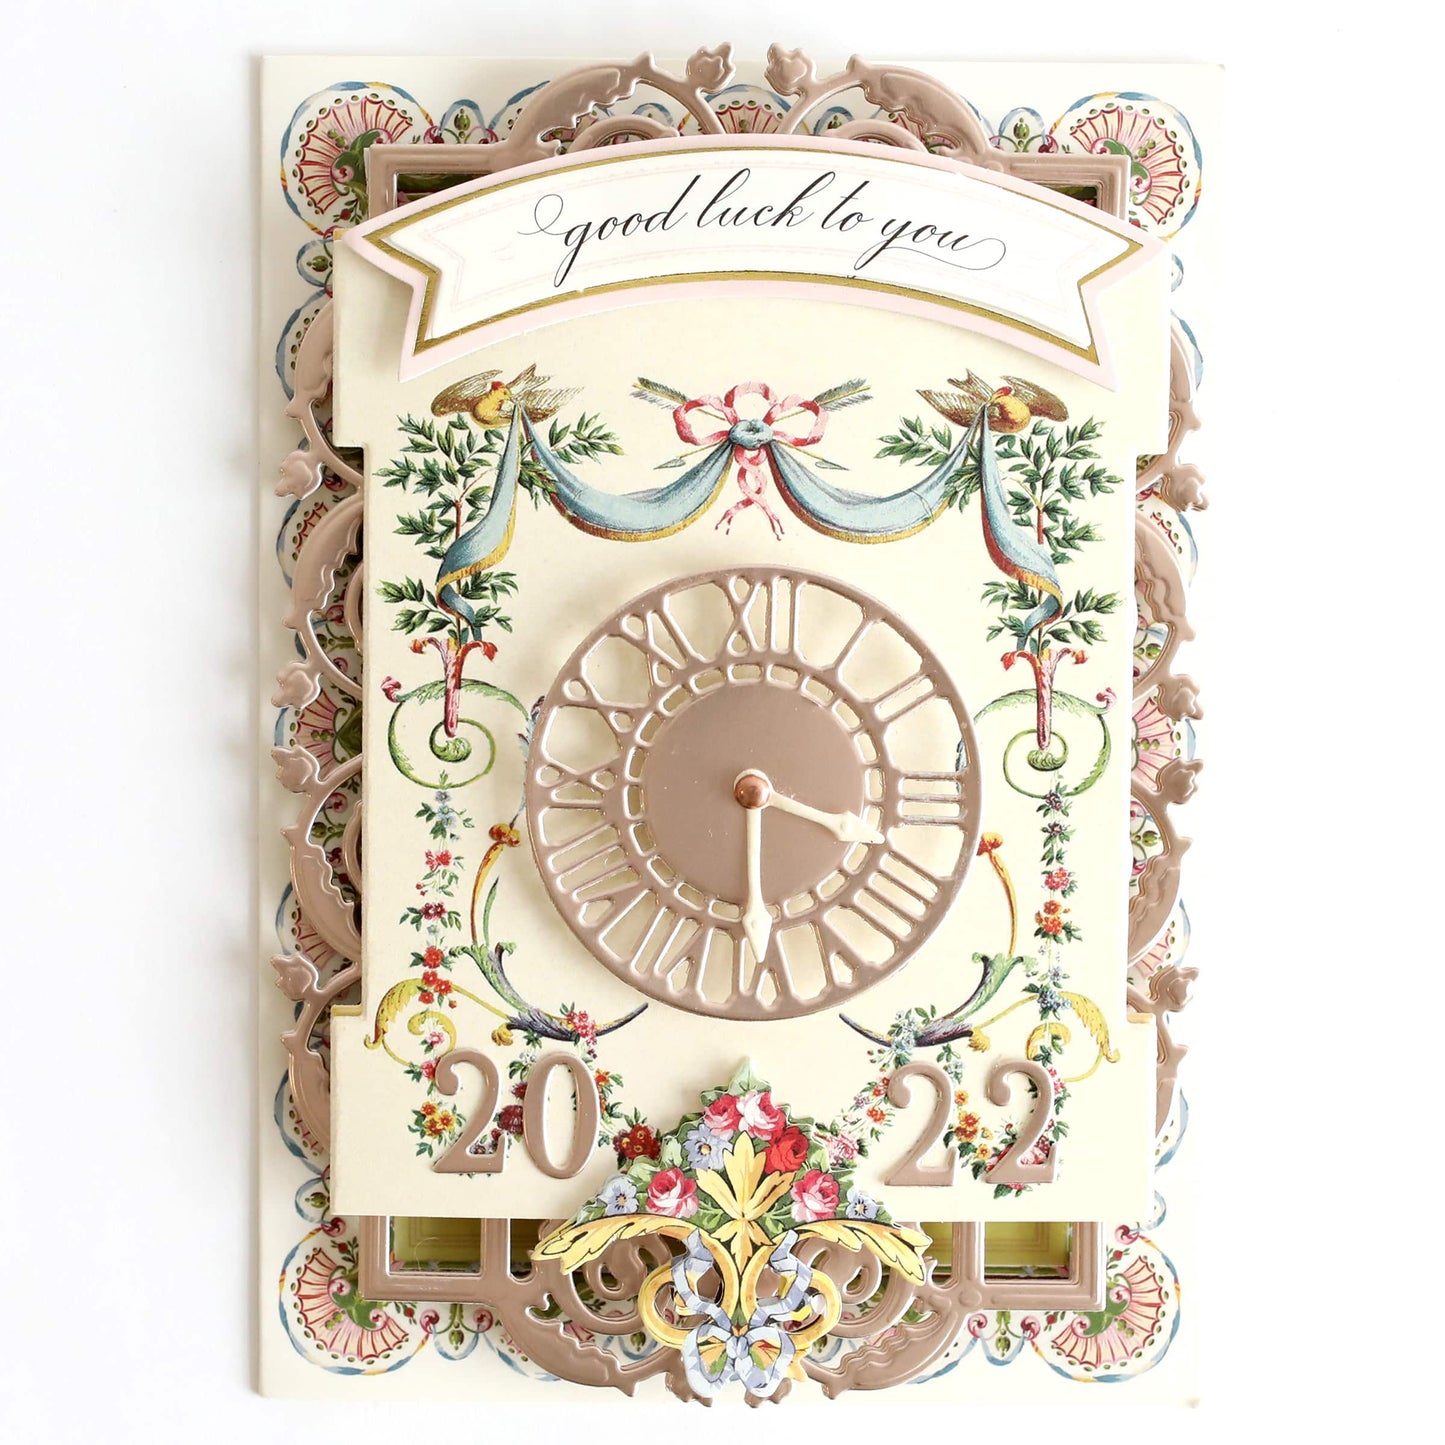 a white clock with a floral design on it.